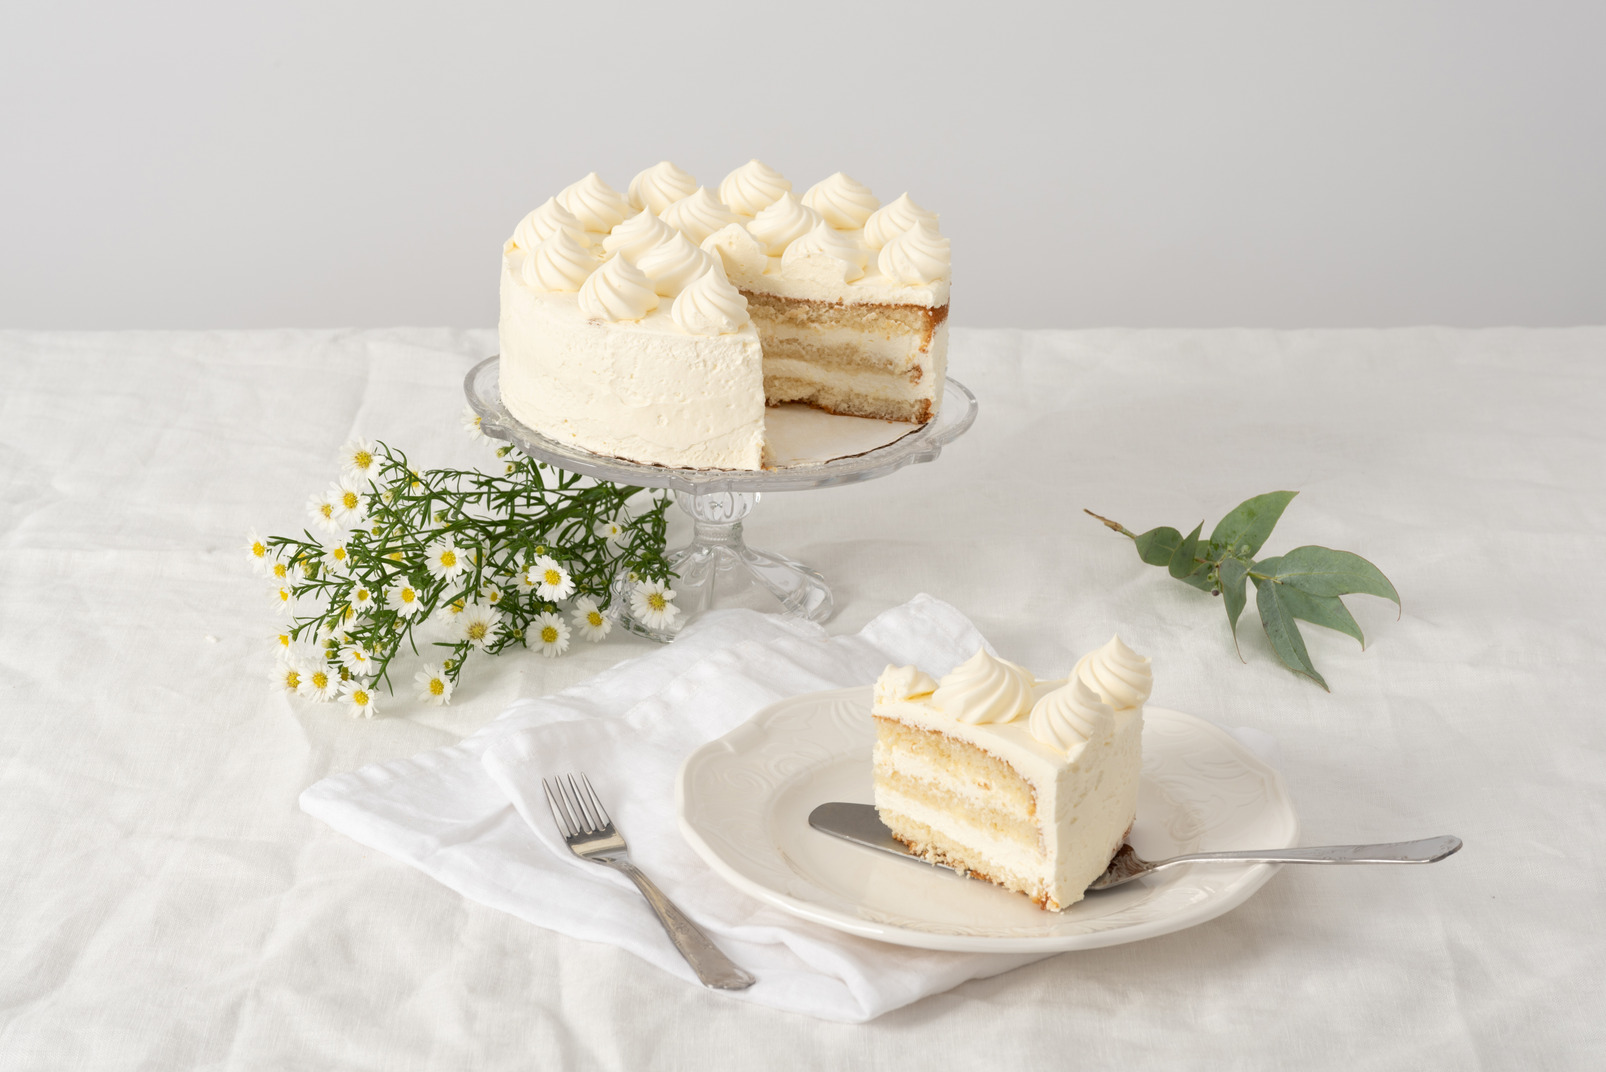 Unbelievable white chocolate cake? done